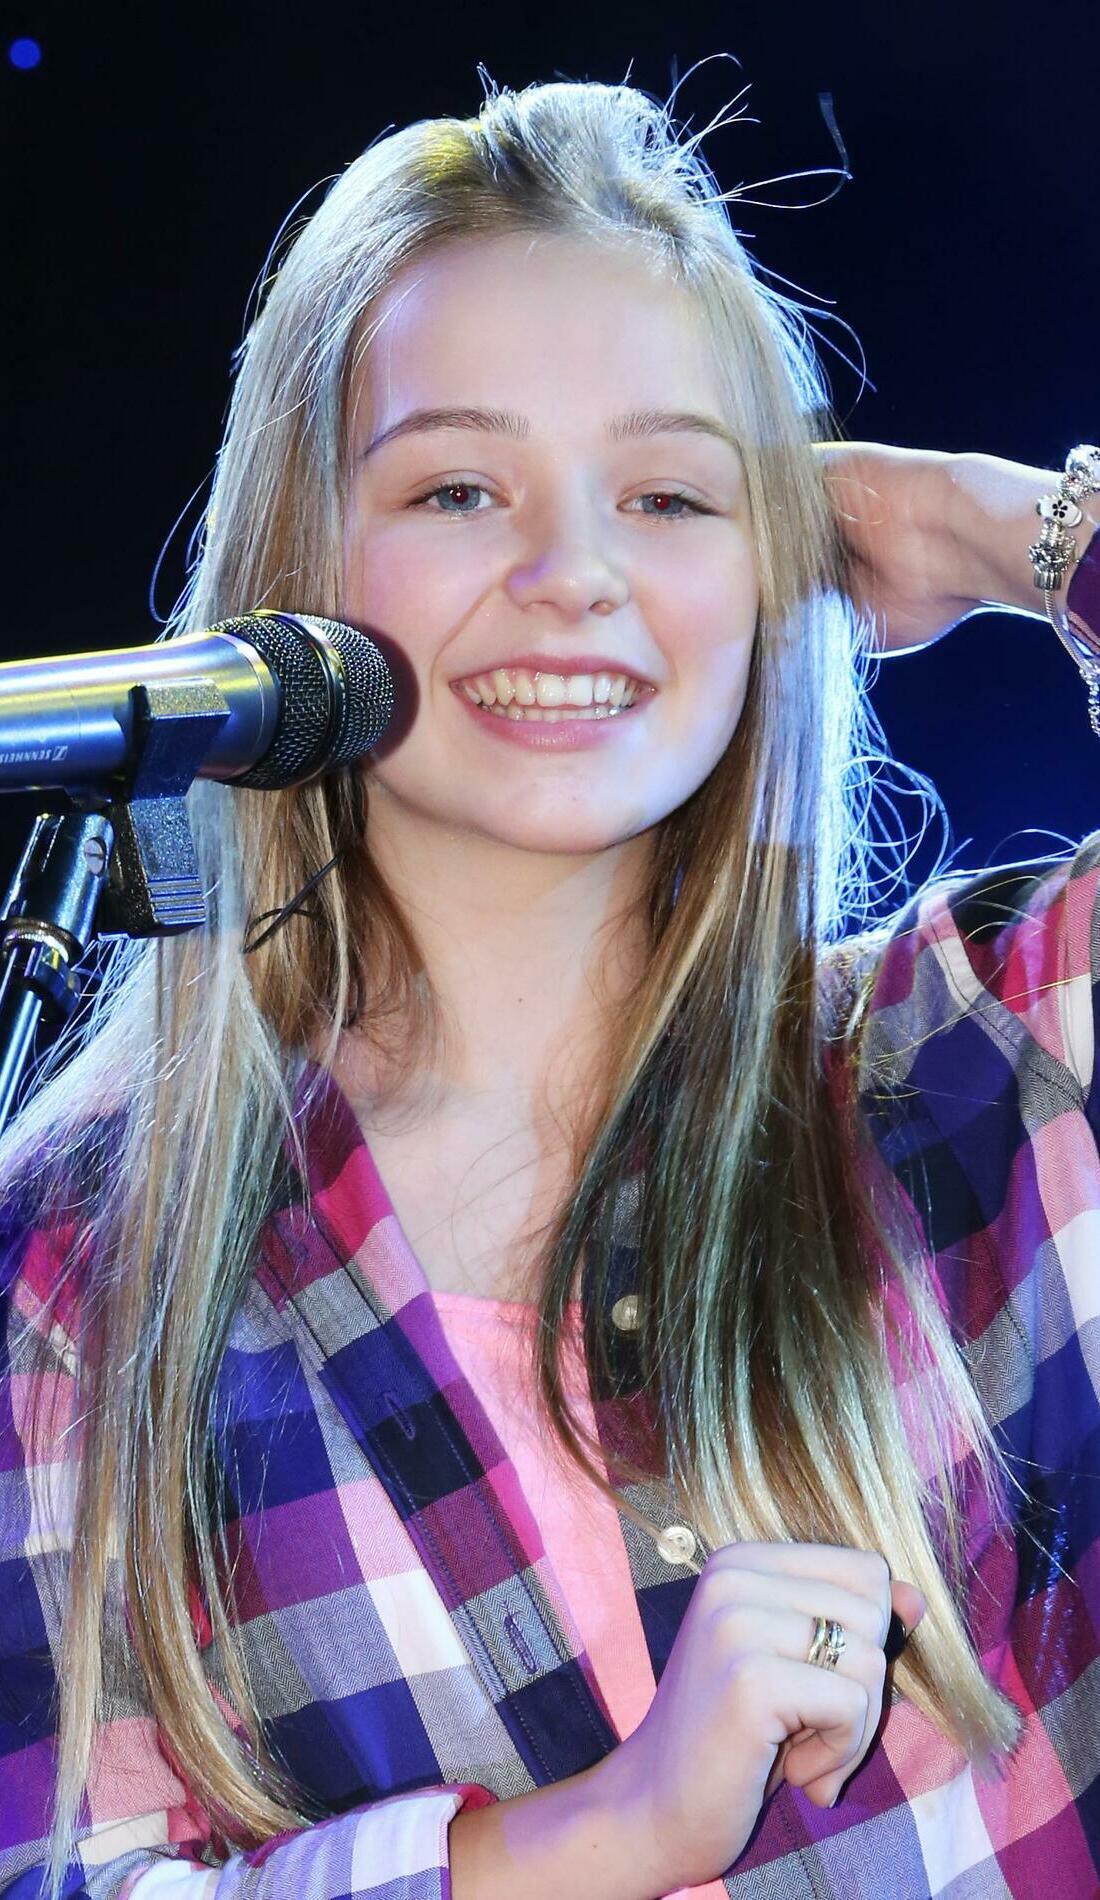 Connie Talbot Tour Announcements 2023 & 2024, Notifications, Dates,  Concerts & Tickets – Songkick